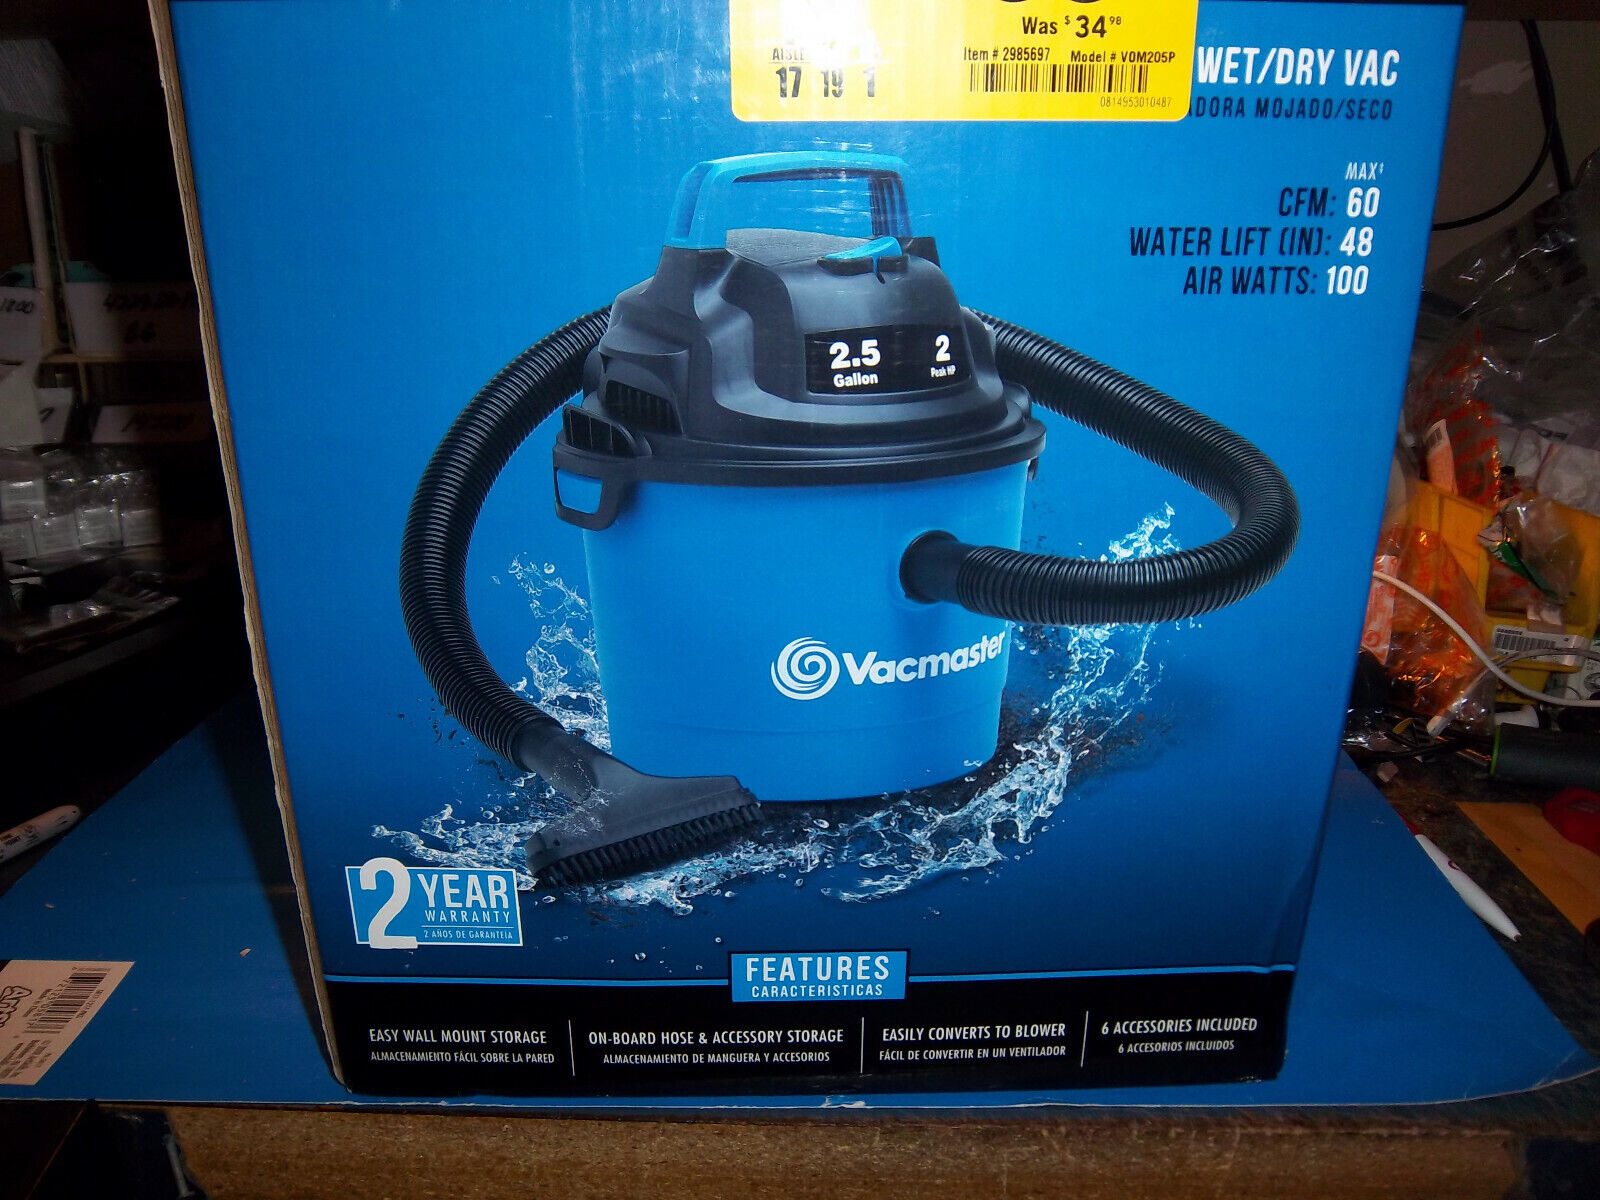 New Vacmaster Vom205p 2.5 Gal. Portable Wet/dry Vac Free Shipping